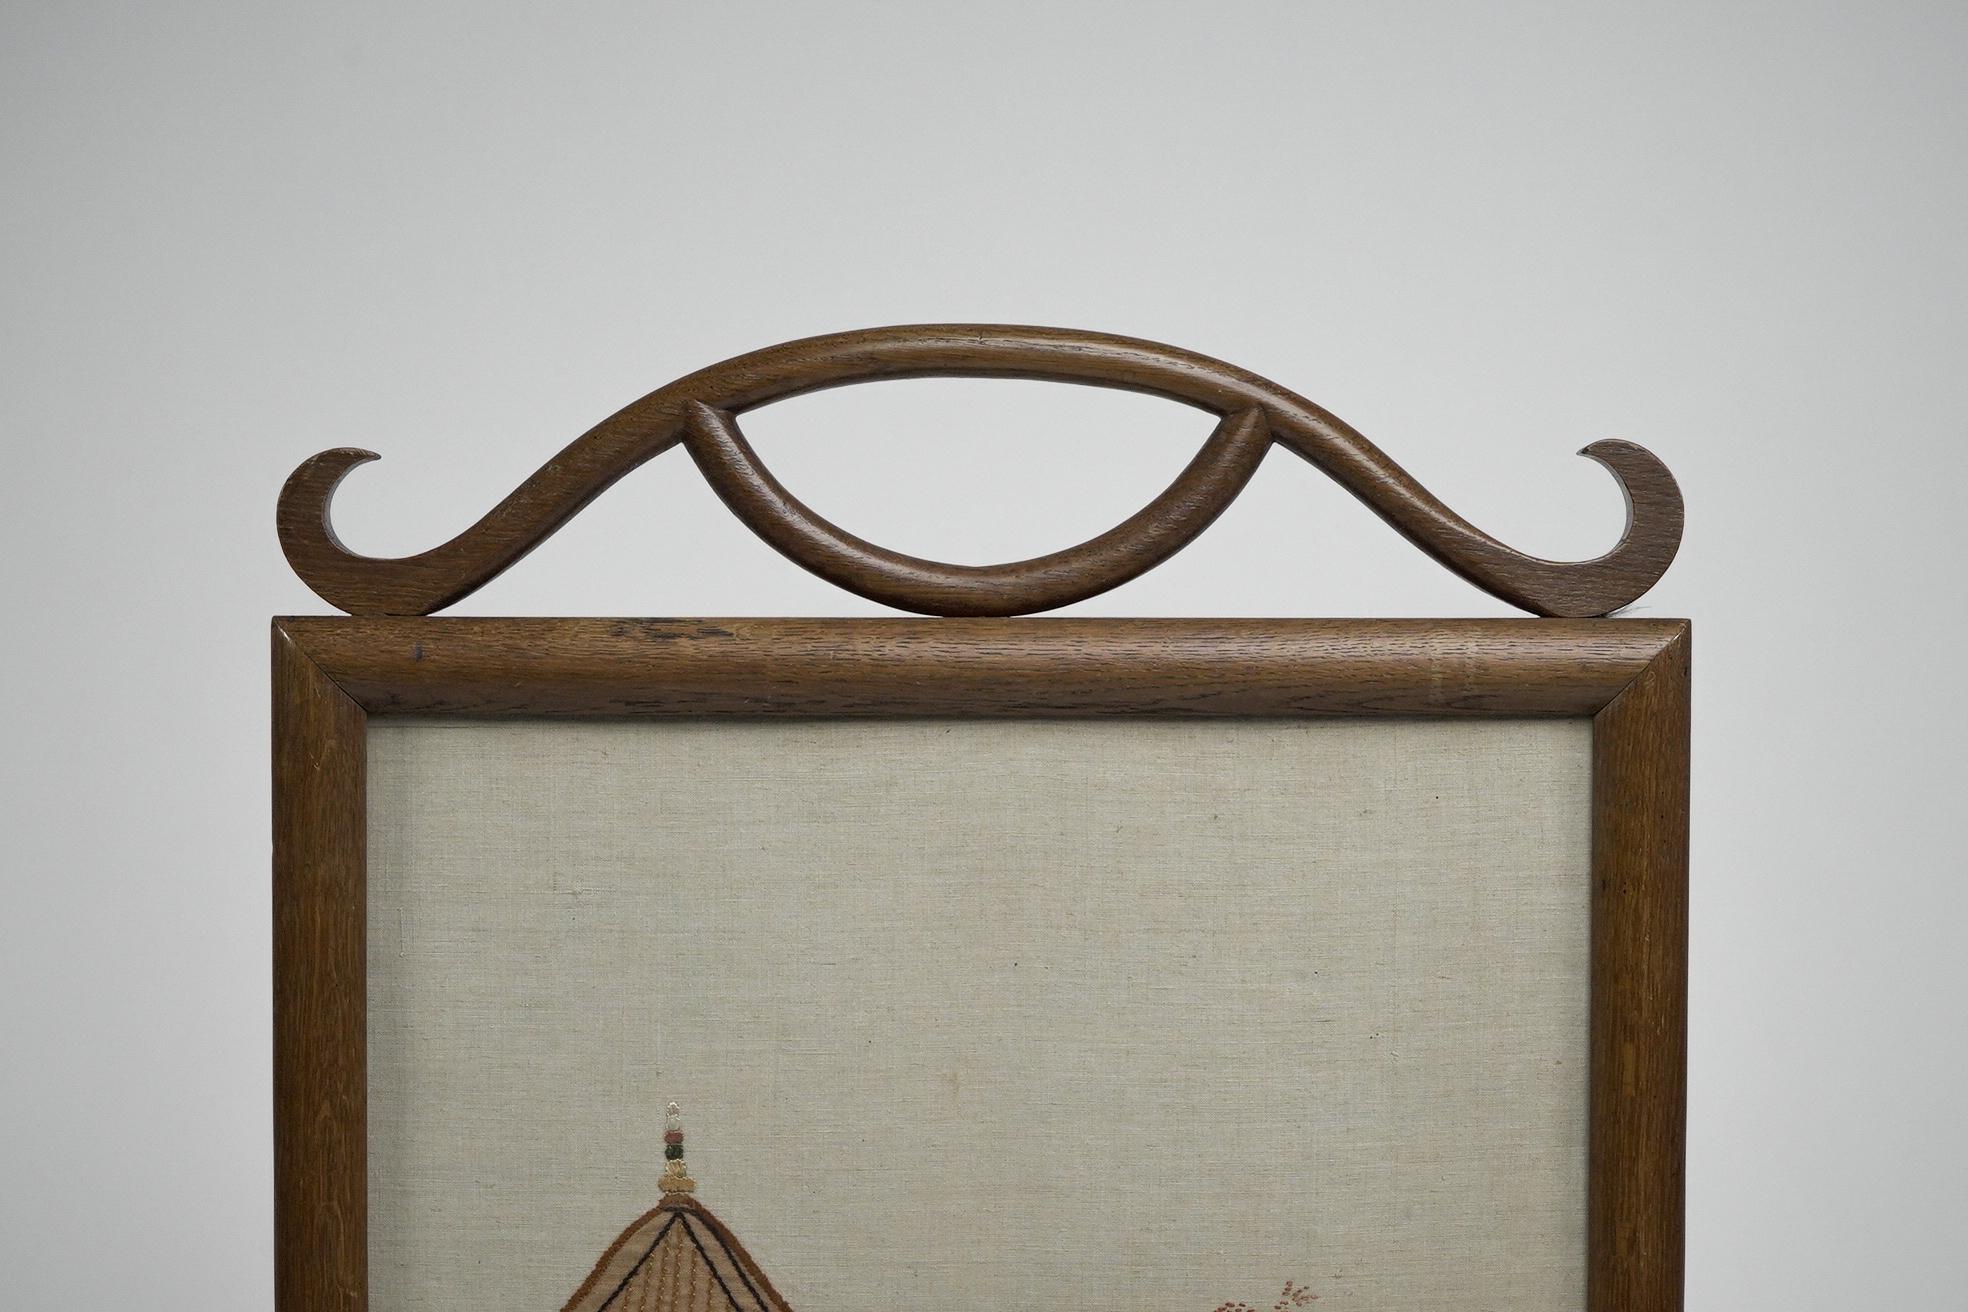 Oak Anglo-Japanese oak firescreen with a Torri gate detail & embroidery river scene. For Sale